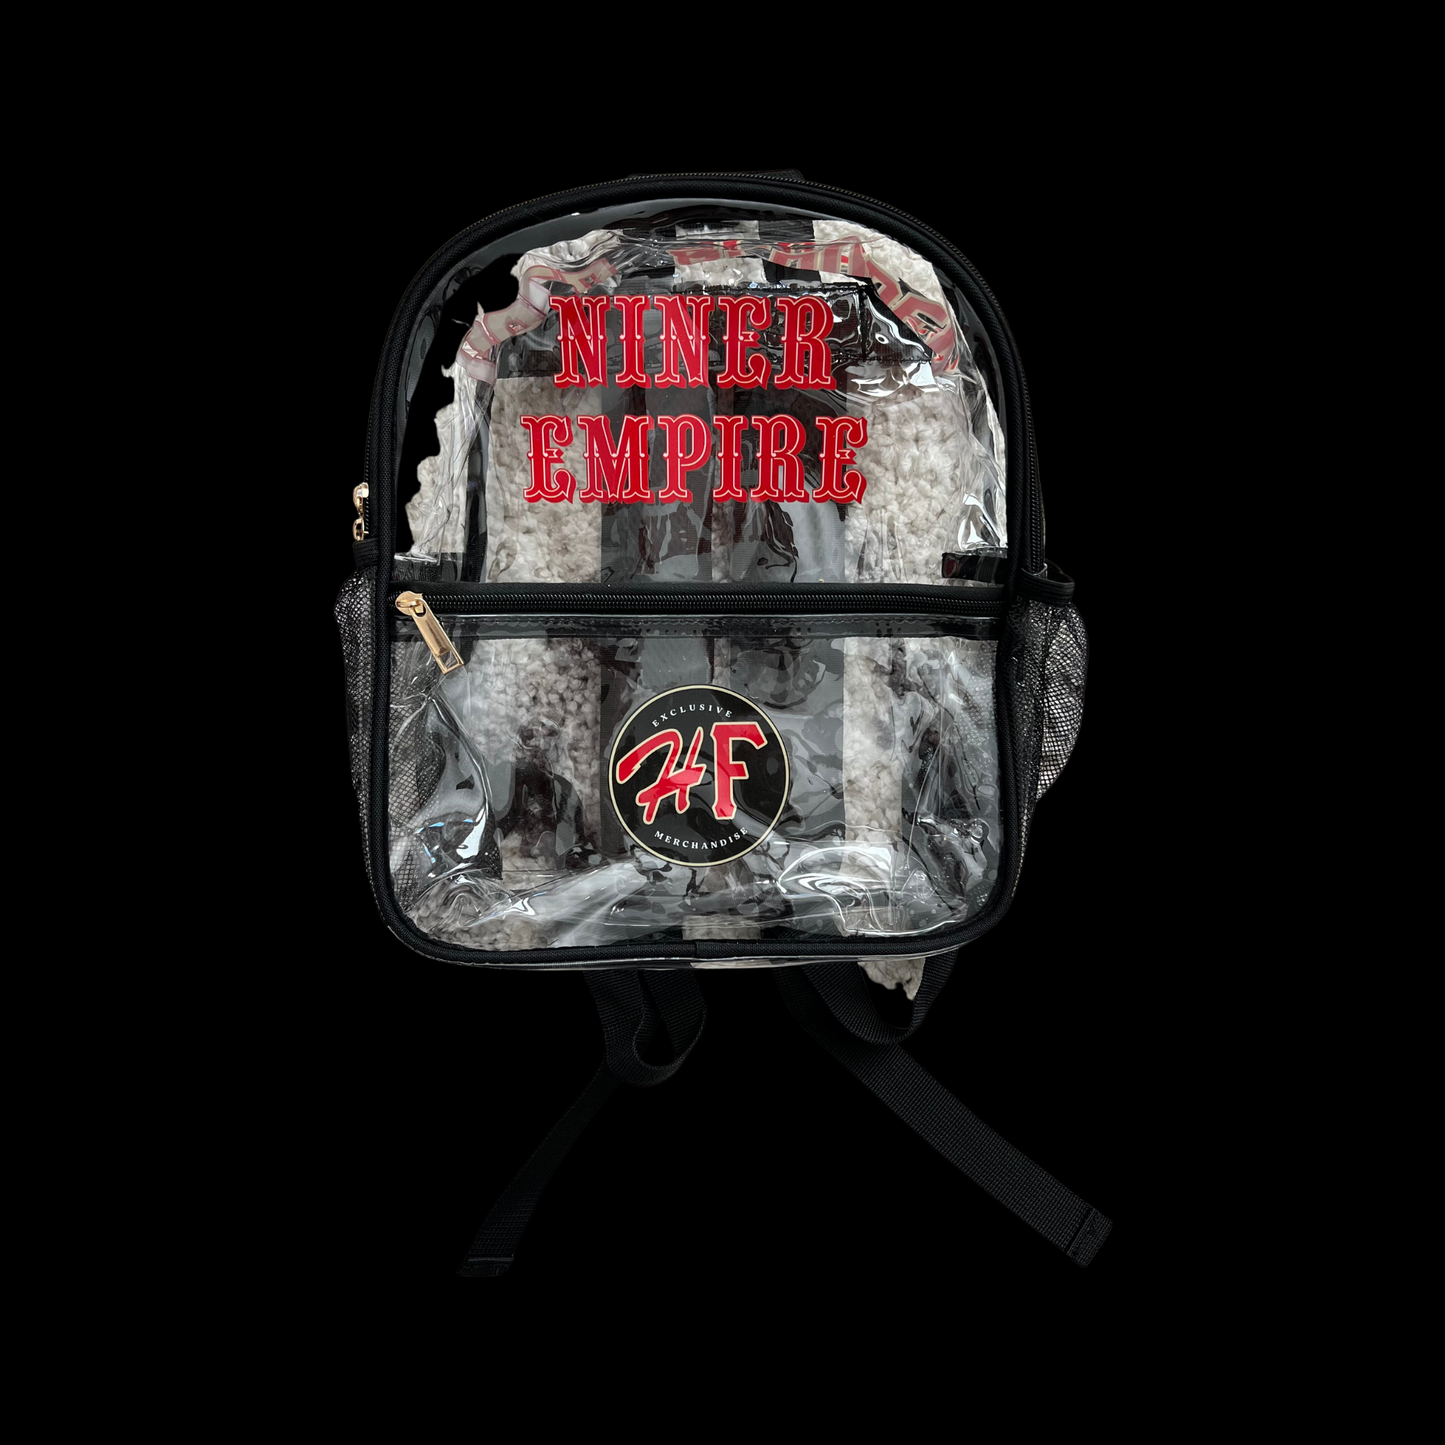 HellaFitted Exclusive Clear 49ers Niner Empire Gold Blooded Backpack Bag